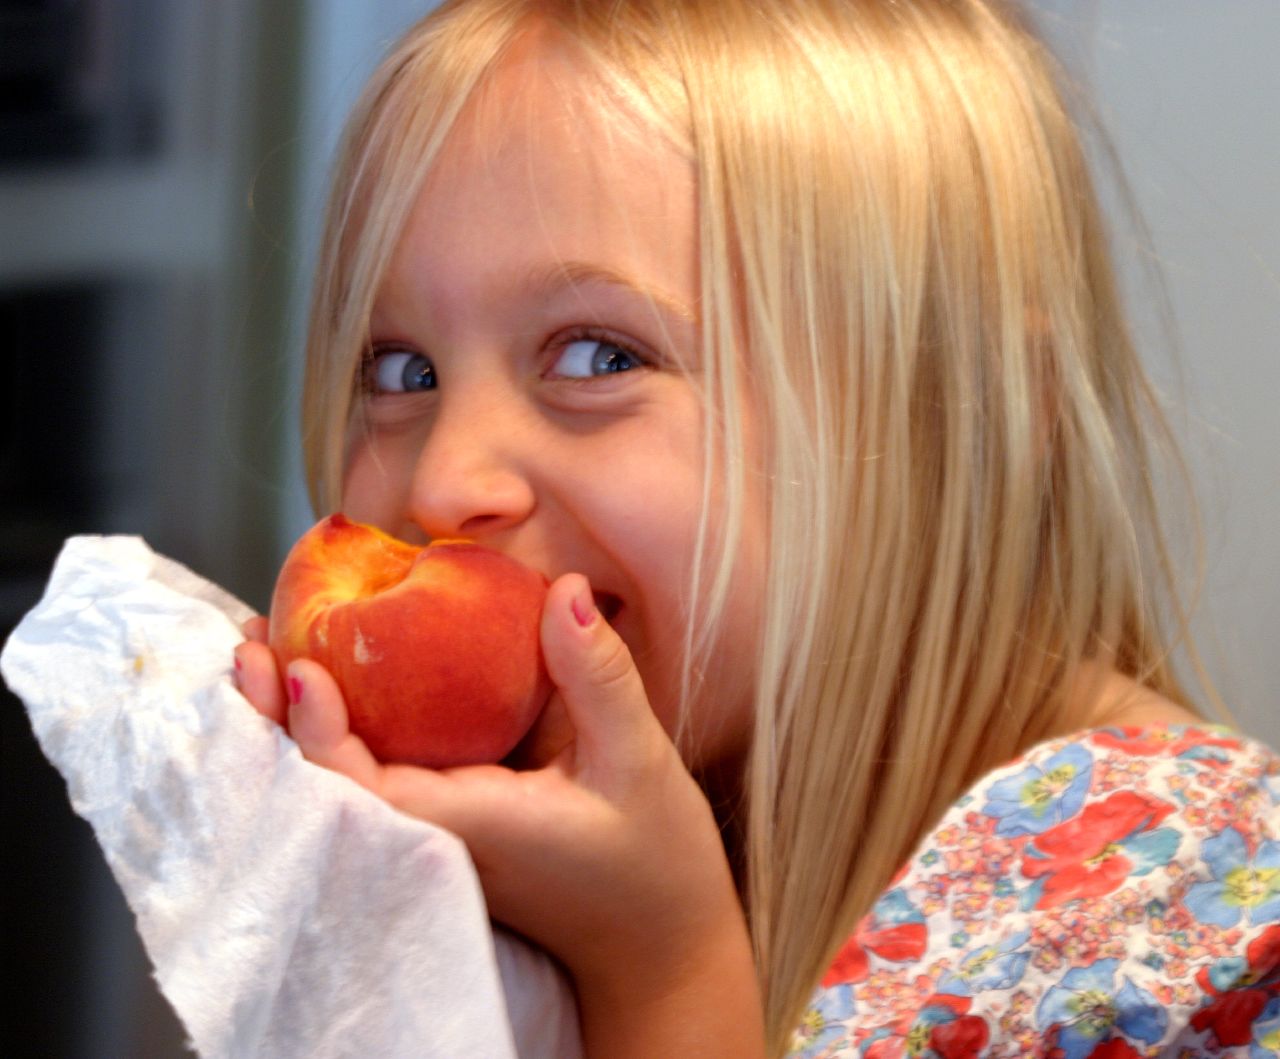 A little girl eating a peach and smiling (Bruce Tuten/Flickr)